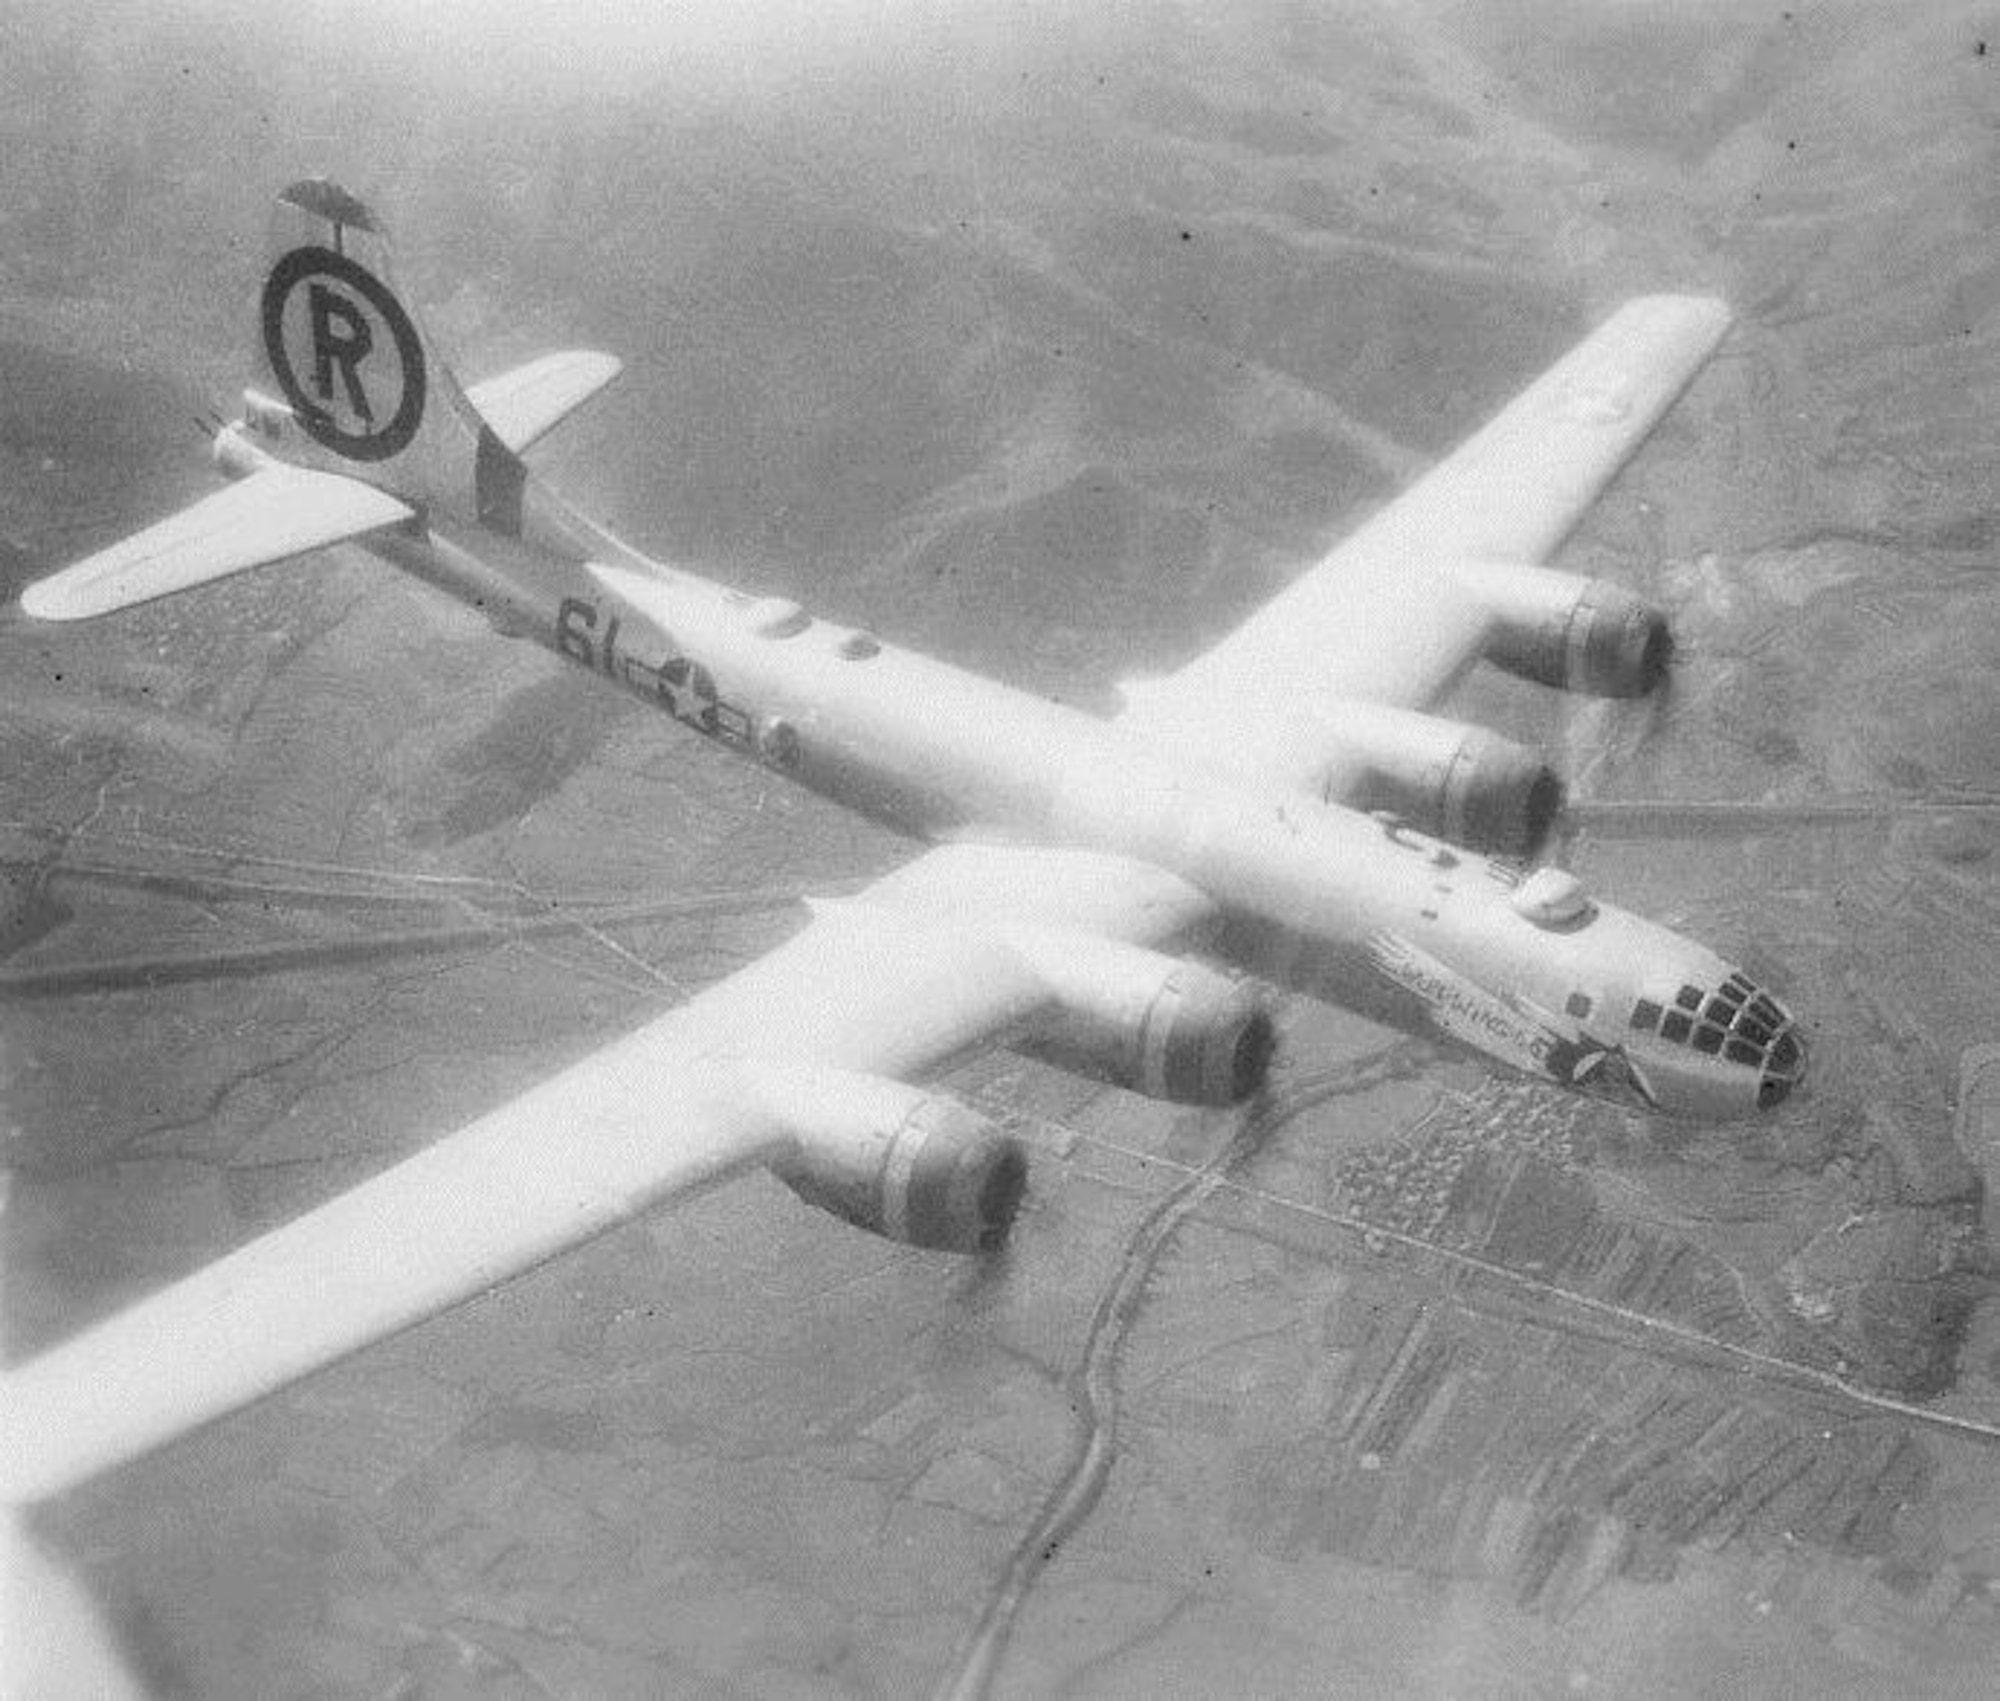 The B-29 “Wun Wing Lo” was assigned to the 40th Bomb Squadron.  It was flown by the Capt. Harrison M. Harp, Jr. Crew, #40r4.  Sgt Arthur H. "Art" Angel, a mechanic who worked on this airplane, recalled how the aircraft got its name after a truck ran into one of the wings, which was replaced.  The replacement wing hung lower that the other wing, and the aircraft was then named.   Mrs. Elaine Angel attended the 6th Bomb Group’s Portland reunion in honor of her late husband.  (Courtesy Mr. John Potenza, via 6th Bomb Group Association)